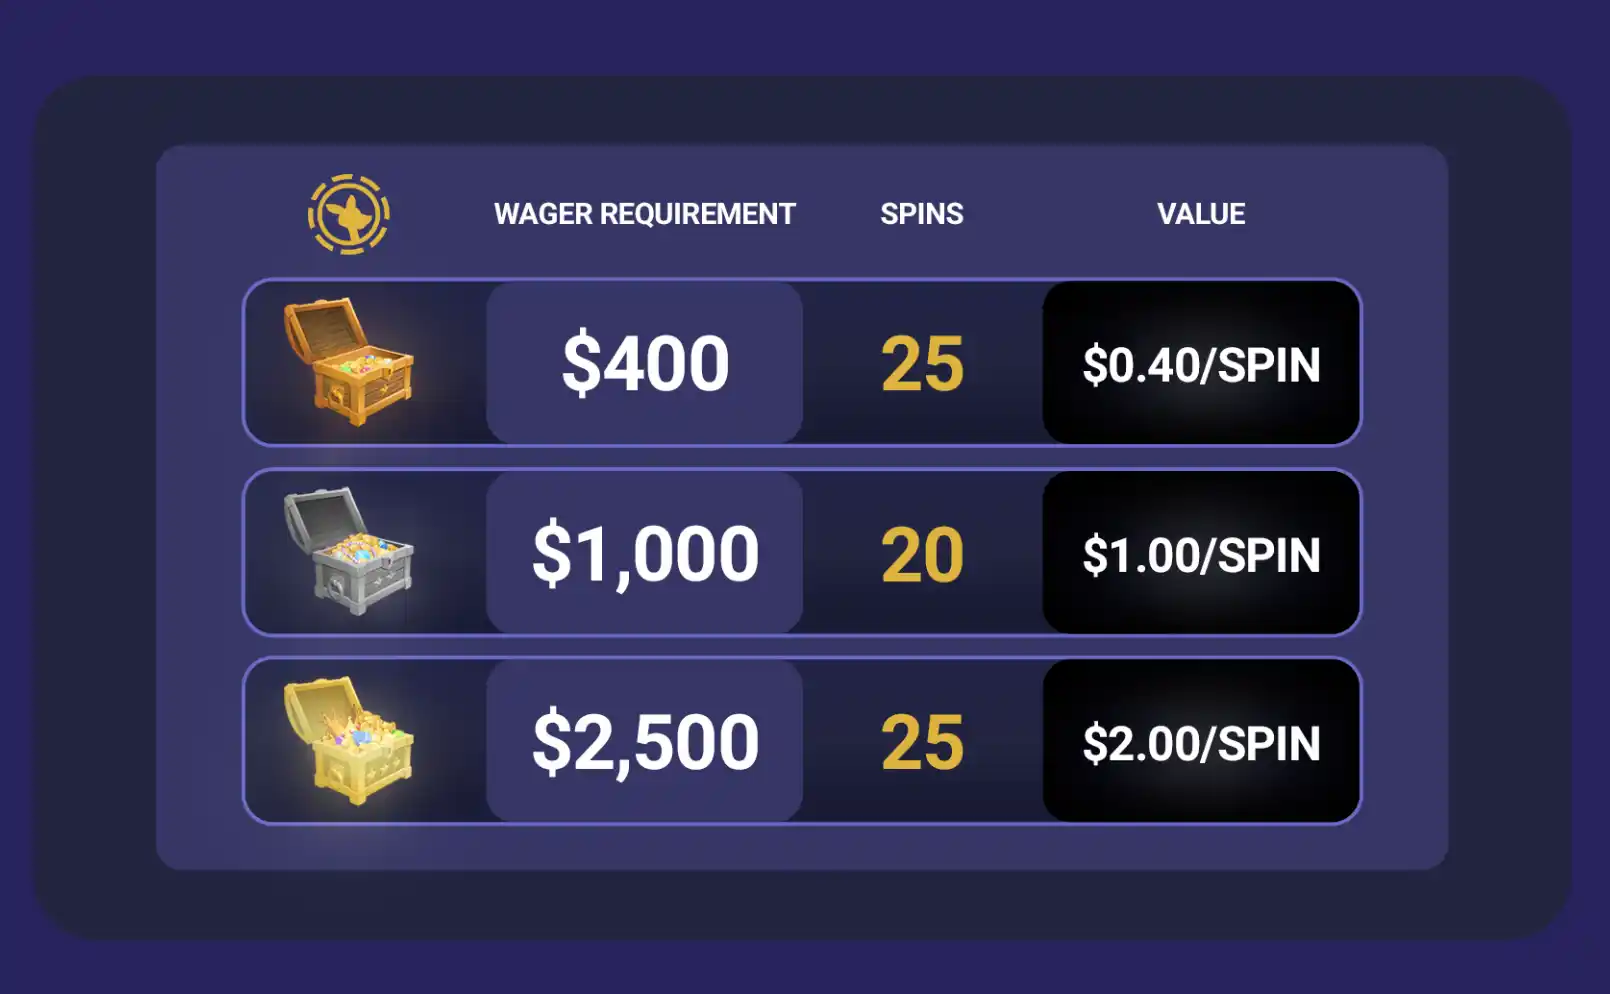 Wagering requirements and value of Roobet's free spins welcome offer